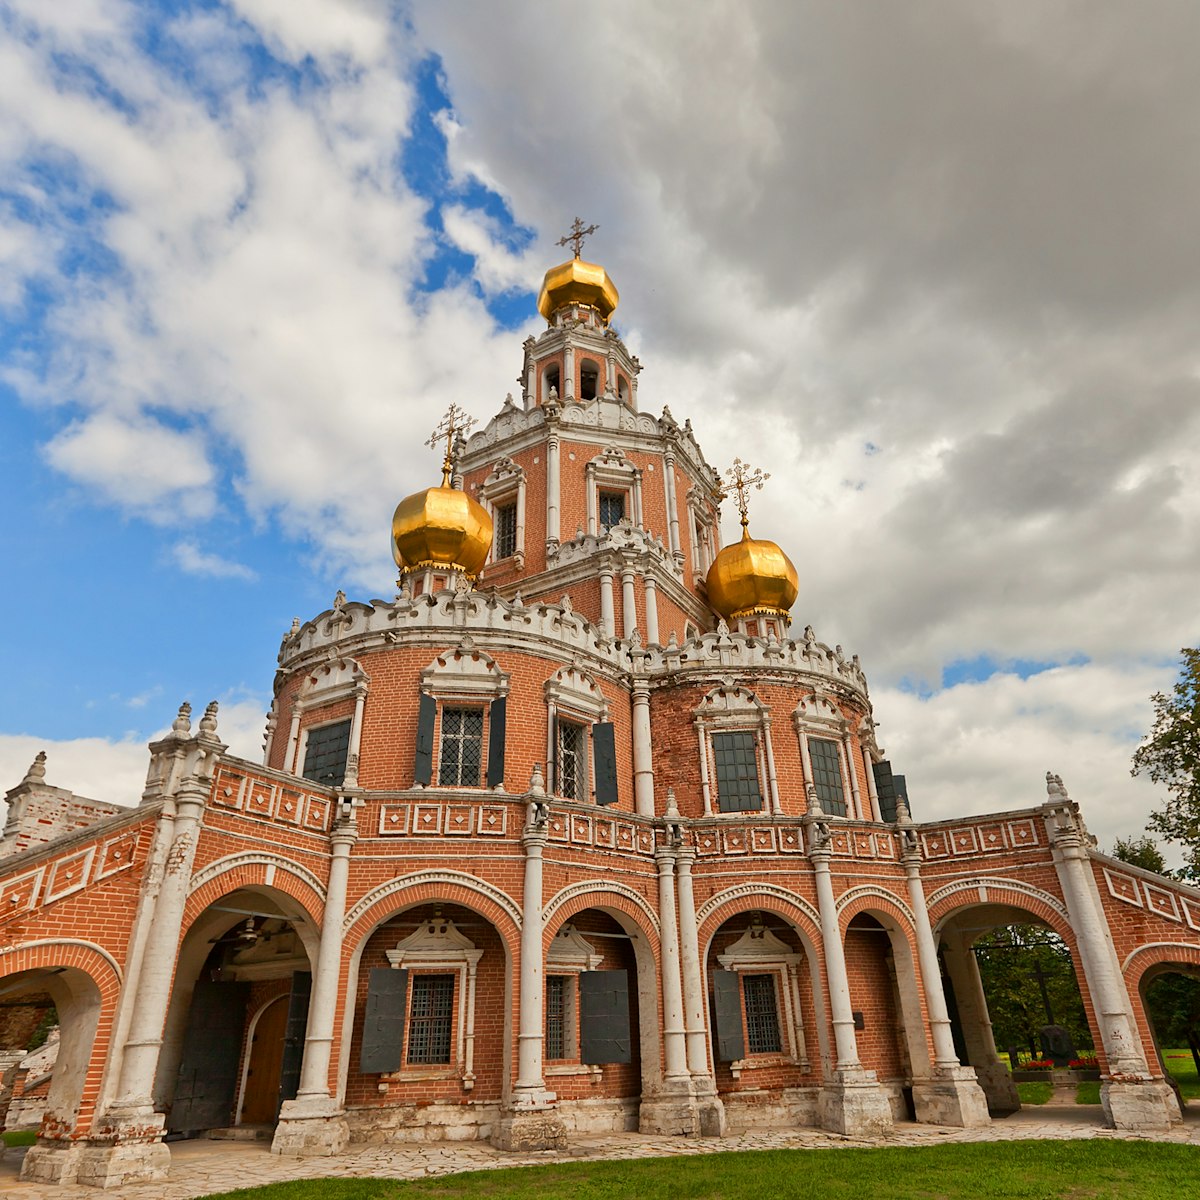 Church of the Intercession at Fili (circa 1694) in Moscow, Russia. Naryshkin baroque church commissioned by the boyar Lev Naryshkin in his suburban estate Fili; Shutterstock ID 215970202; Your name (First / Last): Josh Vogel; Project no. or GL code: 56530; Network activity no. or Cost Centre: Online-Design; Product or Project: 65050/7529/Josh Vogel/LP.com Destination Galleries